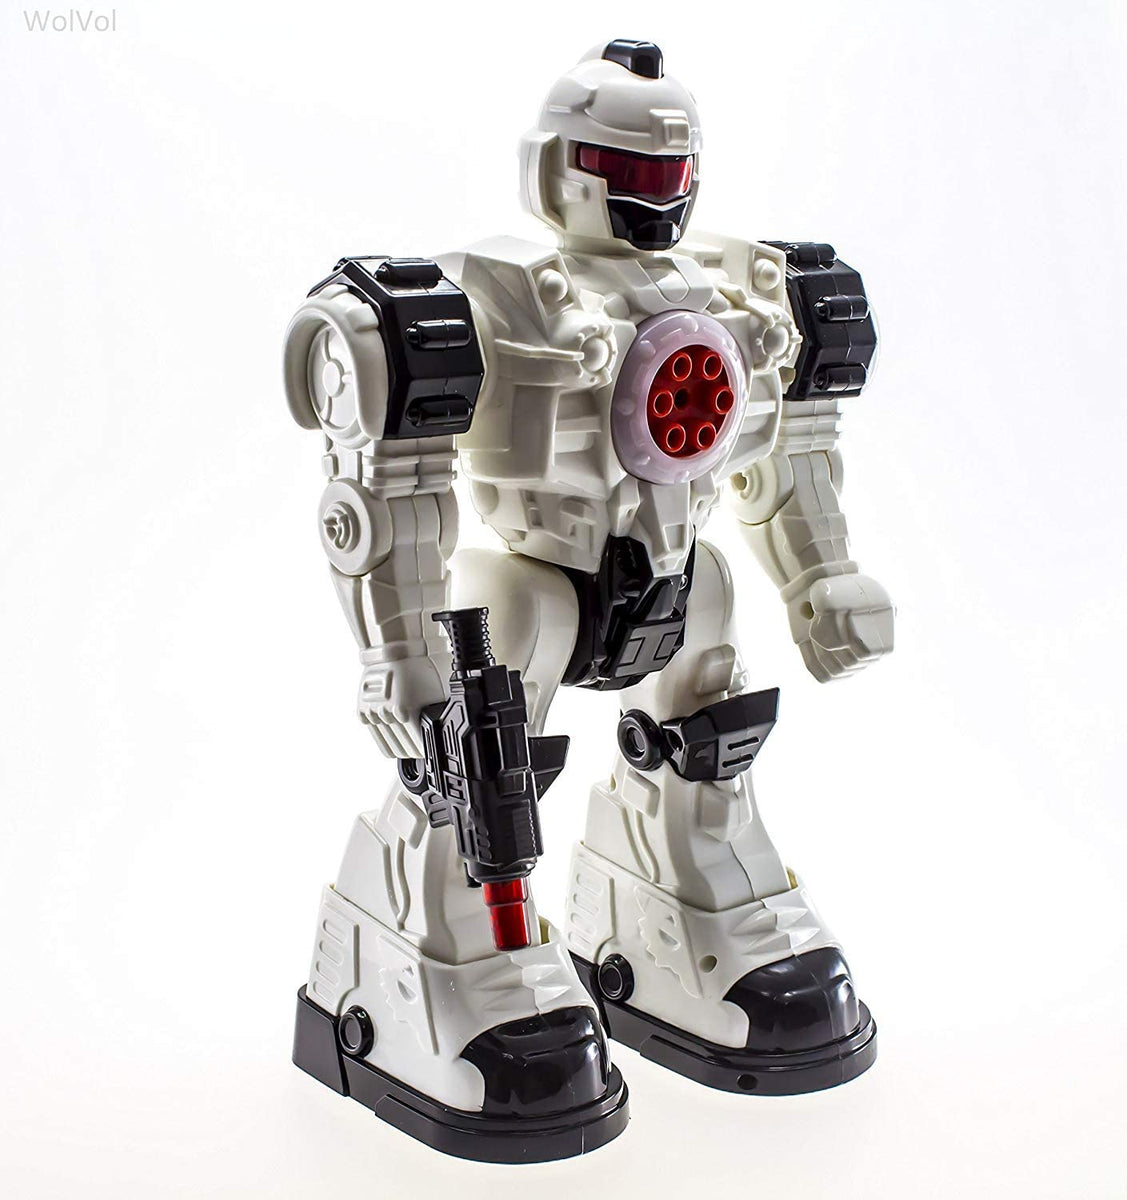 wolvol space astronaut robot toy